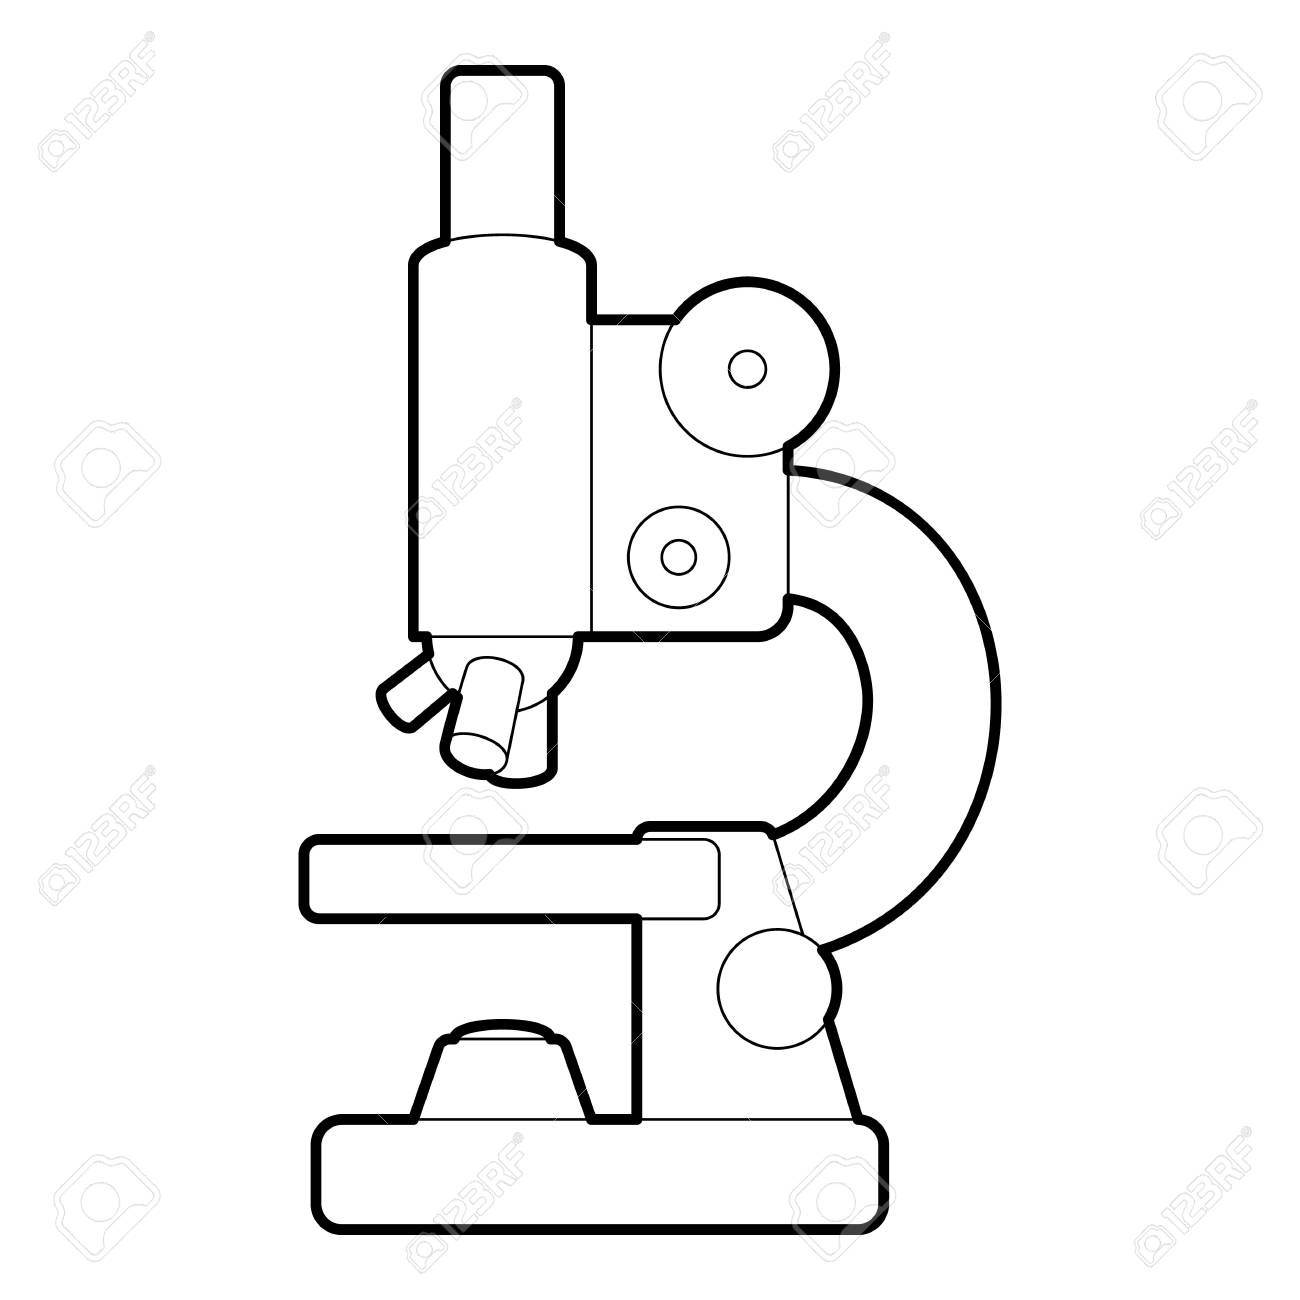 Free Microscope Clipart outline, Download Free Clip Art on